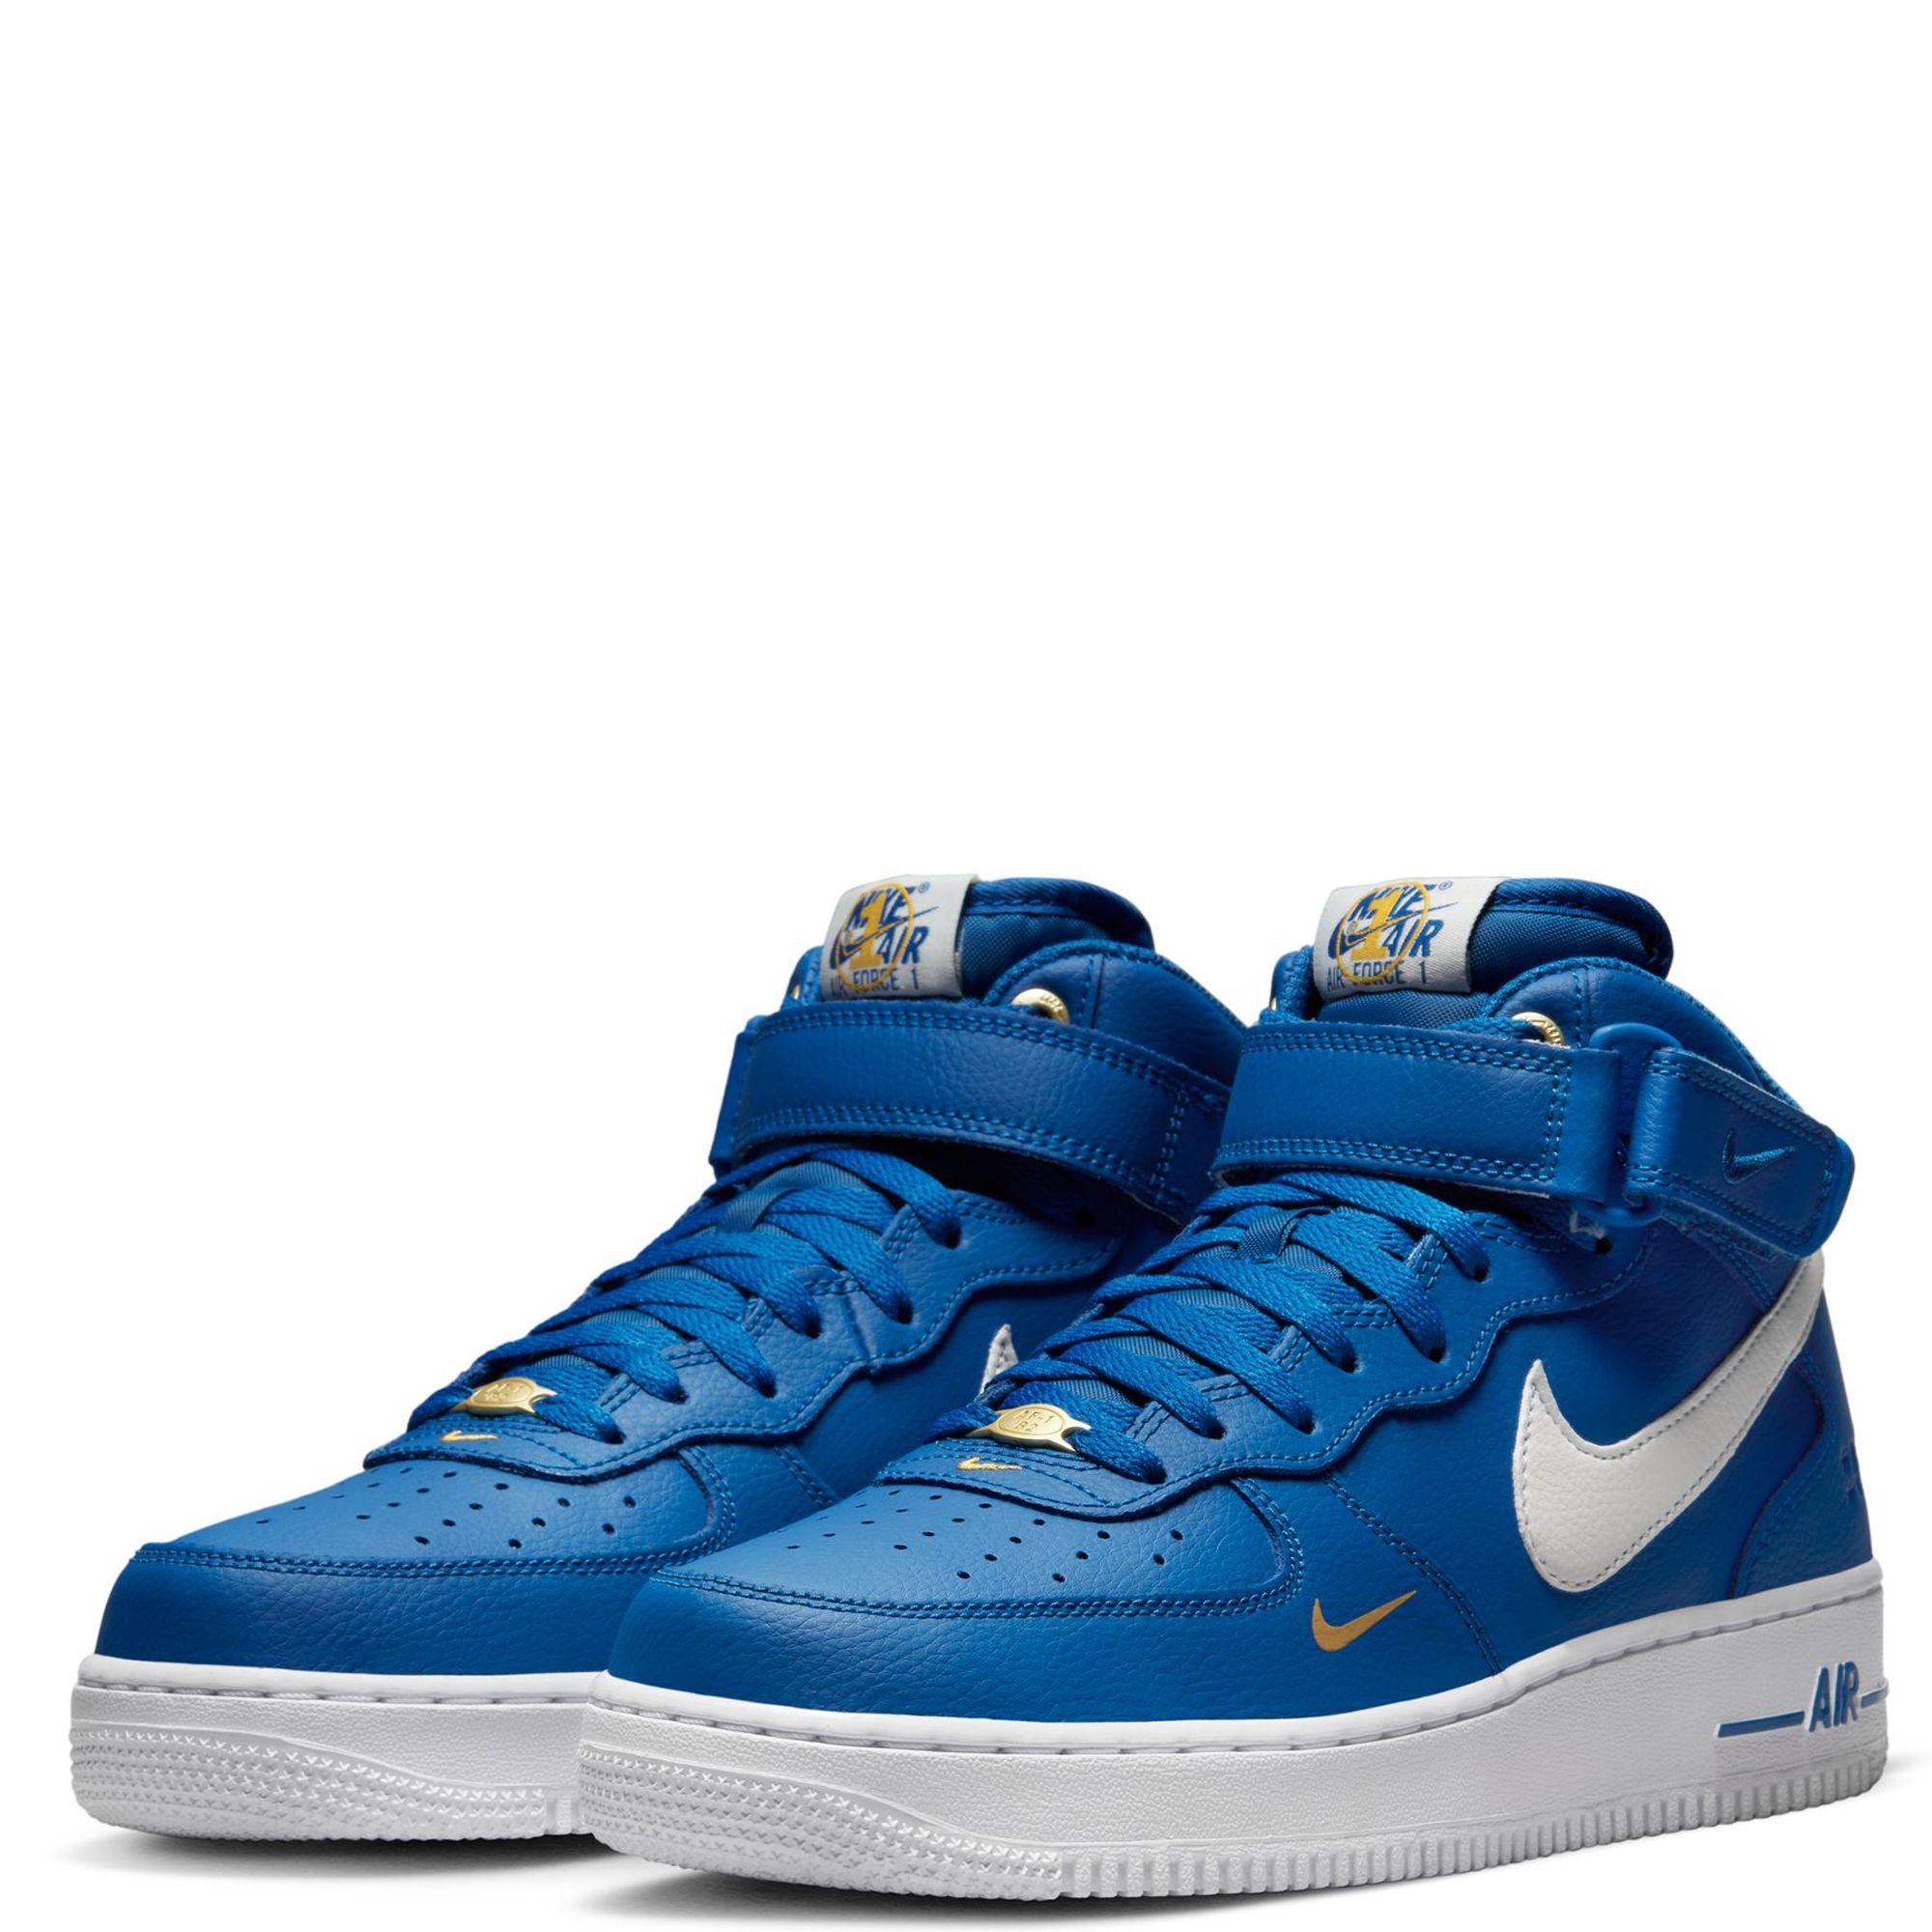 Nike Air Force 1 Mid '07 LV8 'Blue Jay' 10